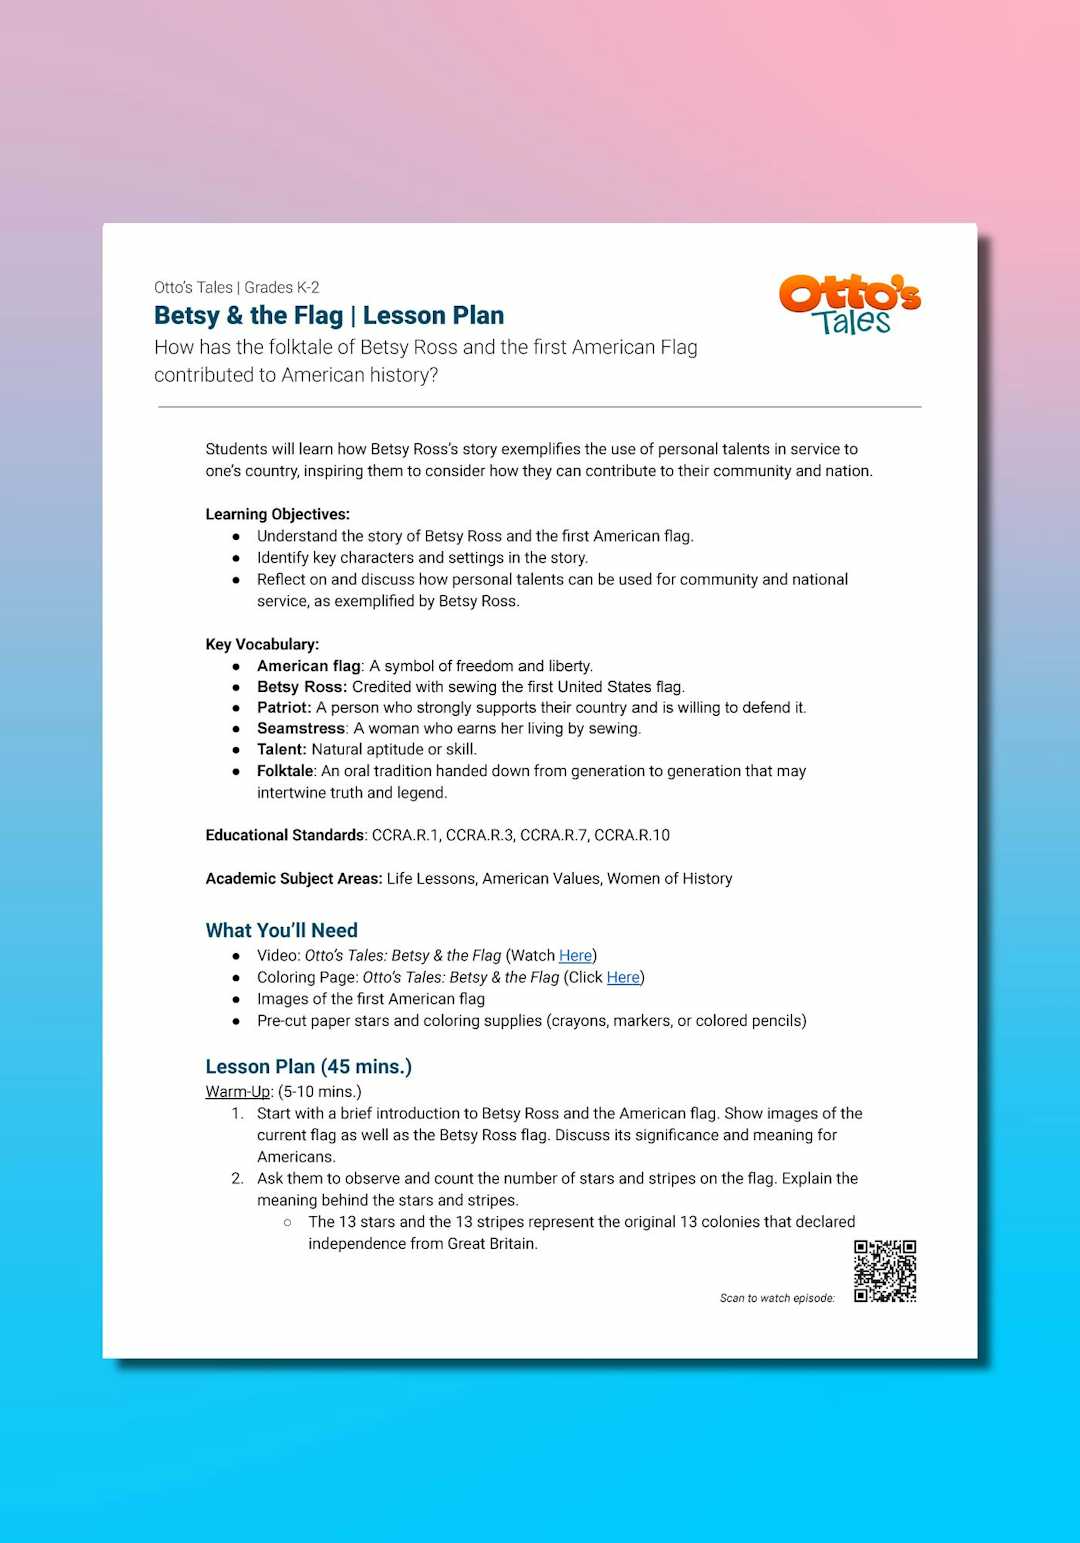 "Otto's Tales: Betsy & the Flag" Lesson Plan